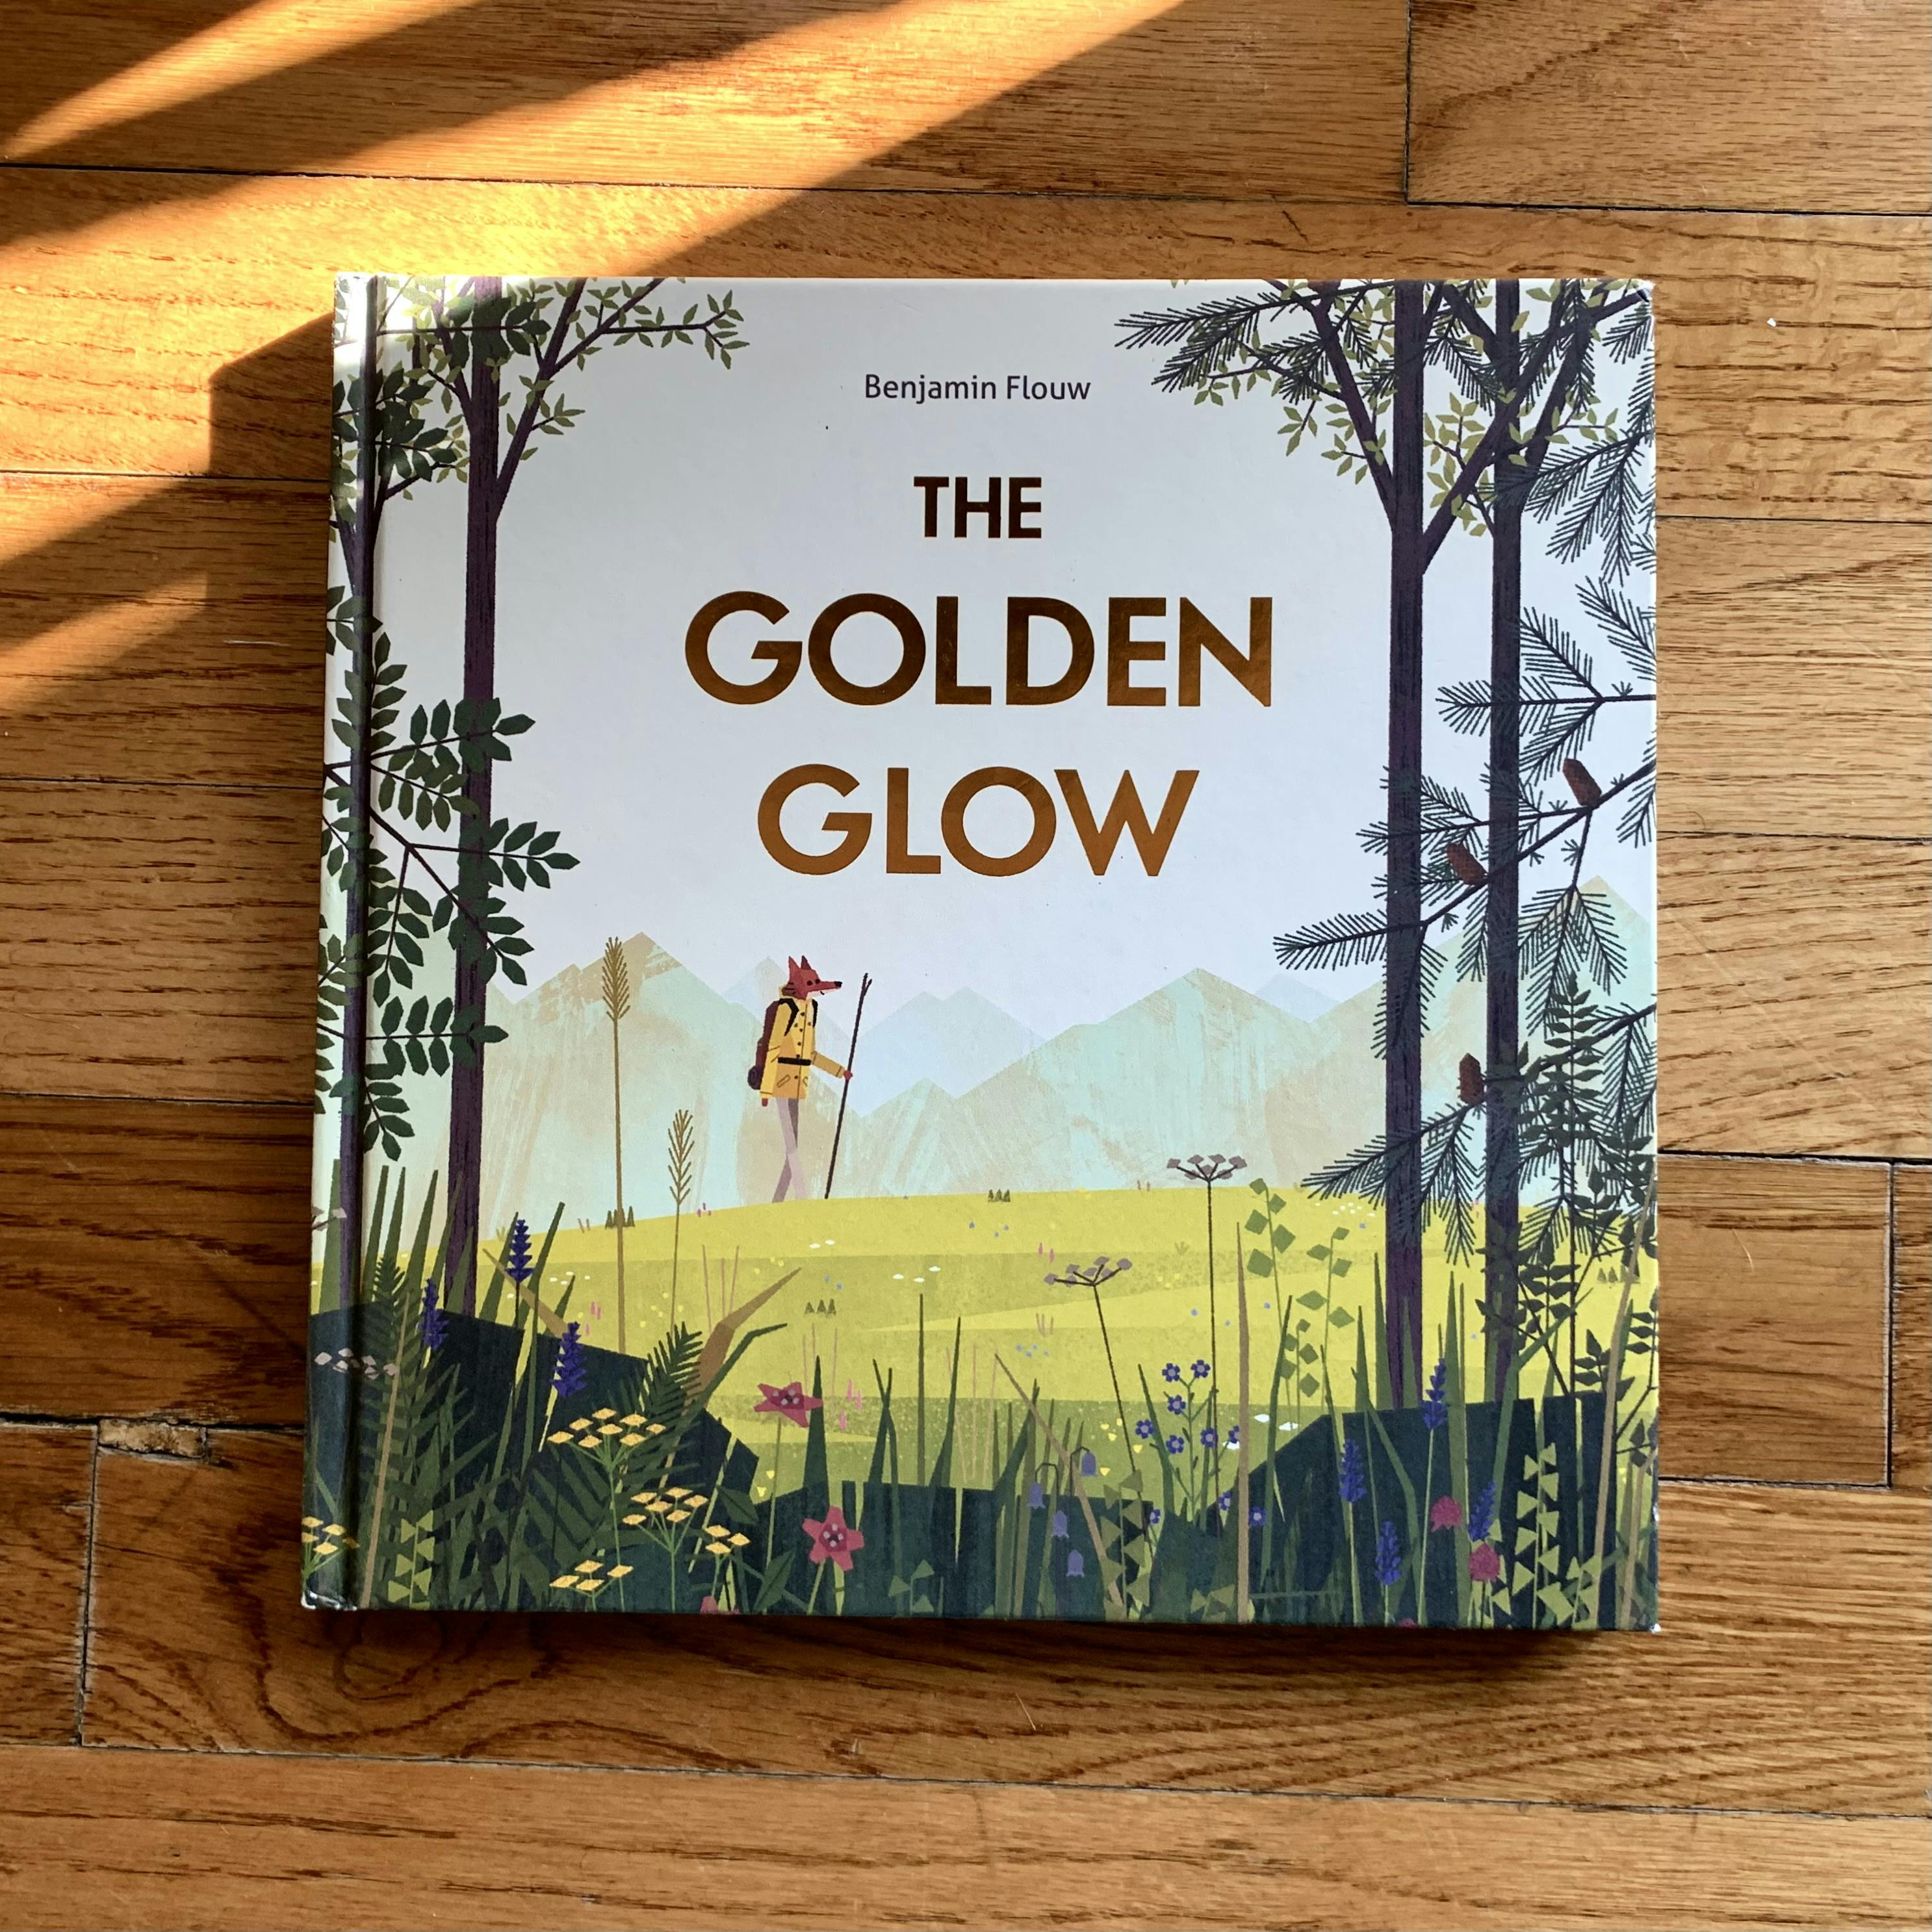 The cover of my copy of ‘The Golden Glow’, by Benjamin Flouw